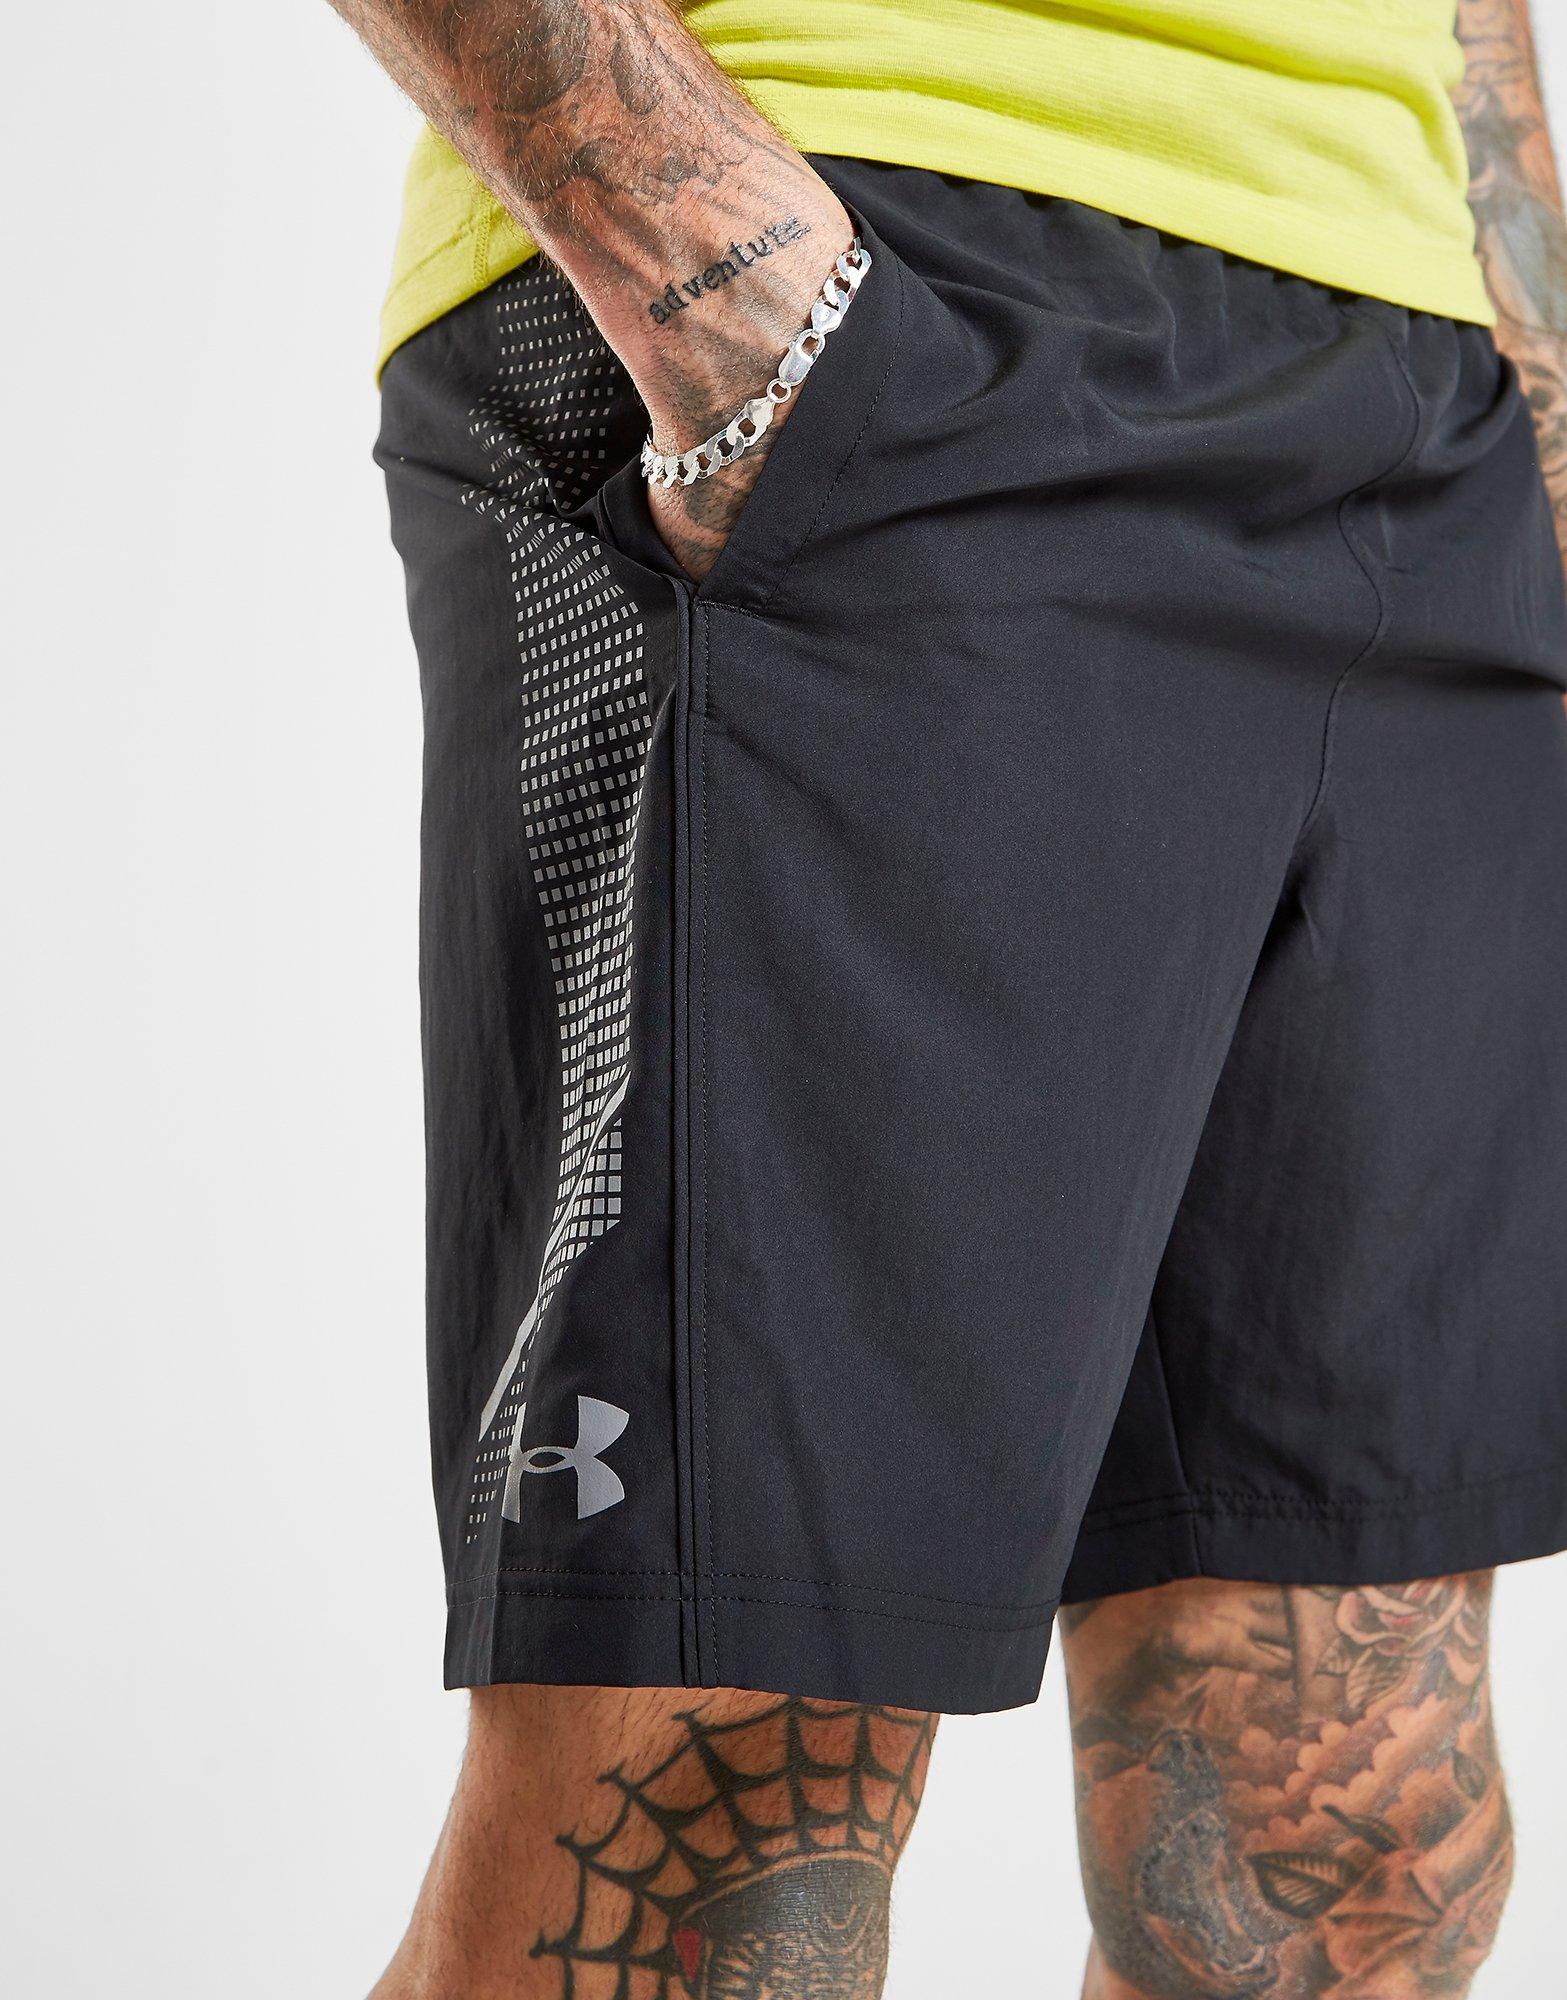 under armour shorts